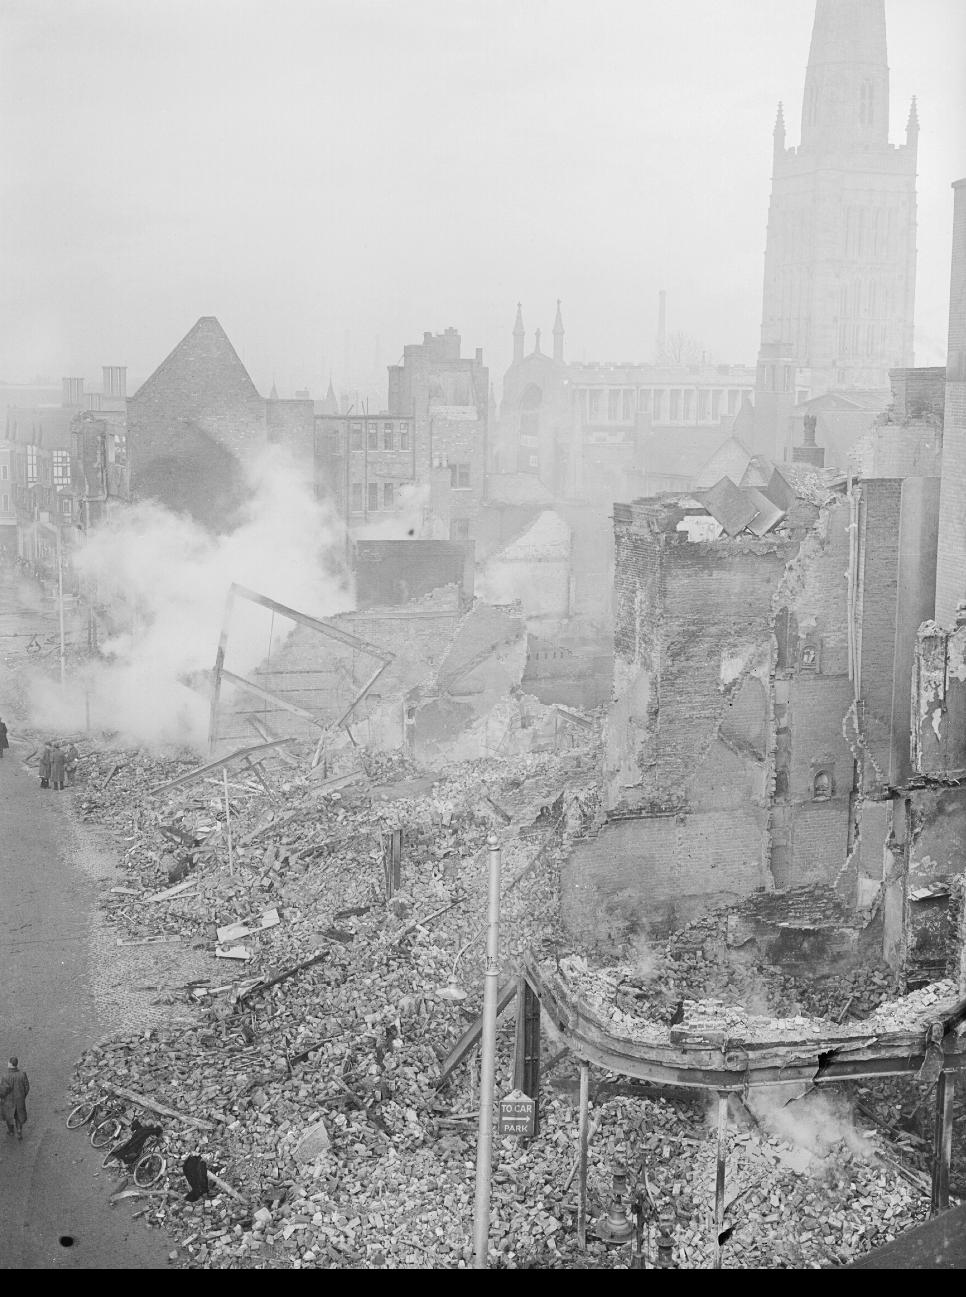 A week later, Arthur Bomber Harris took over leadership of Bomber Command and planned a series of nighttime area bombings of German cities Lübeck in March, Rostock in April, and, in May, an